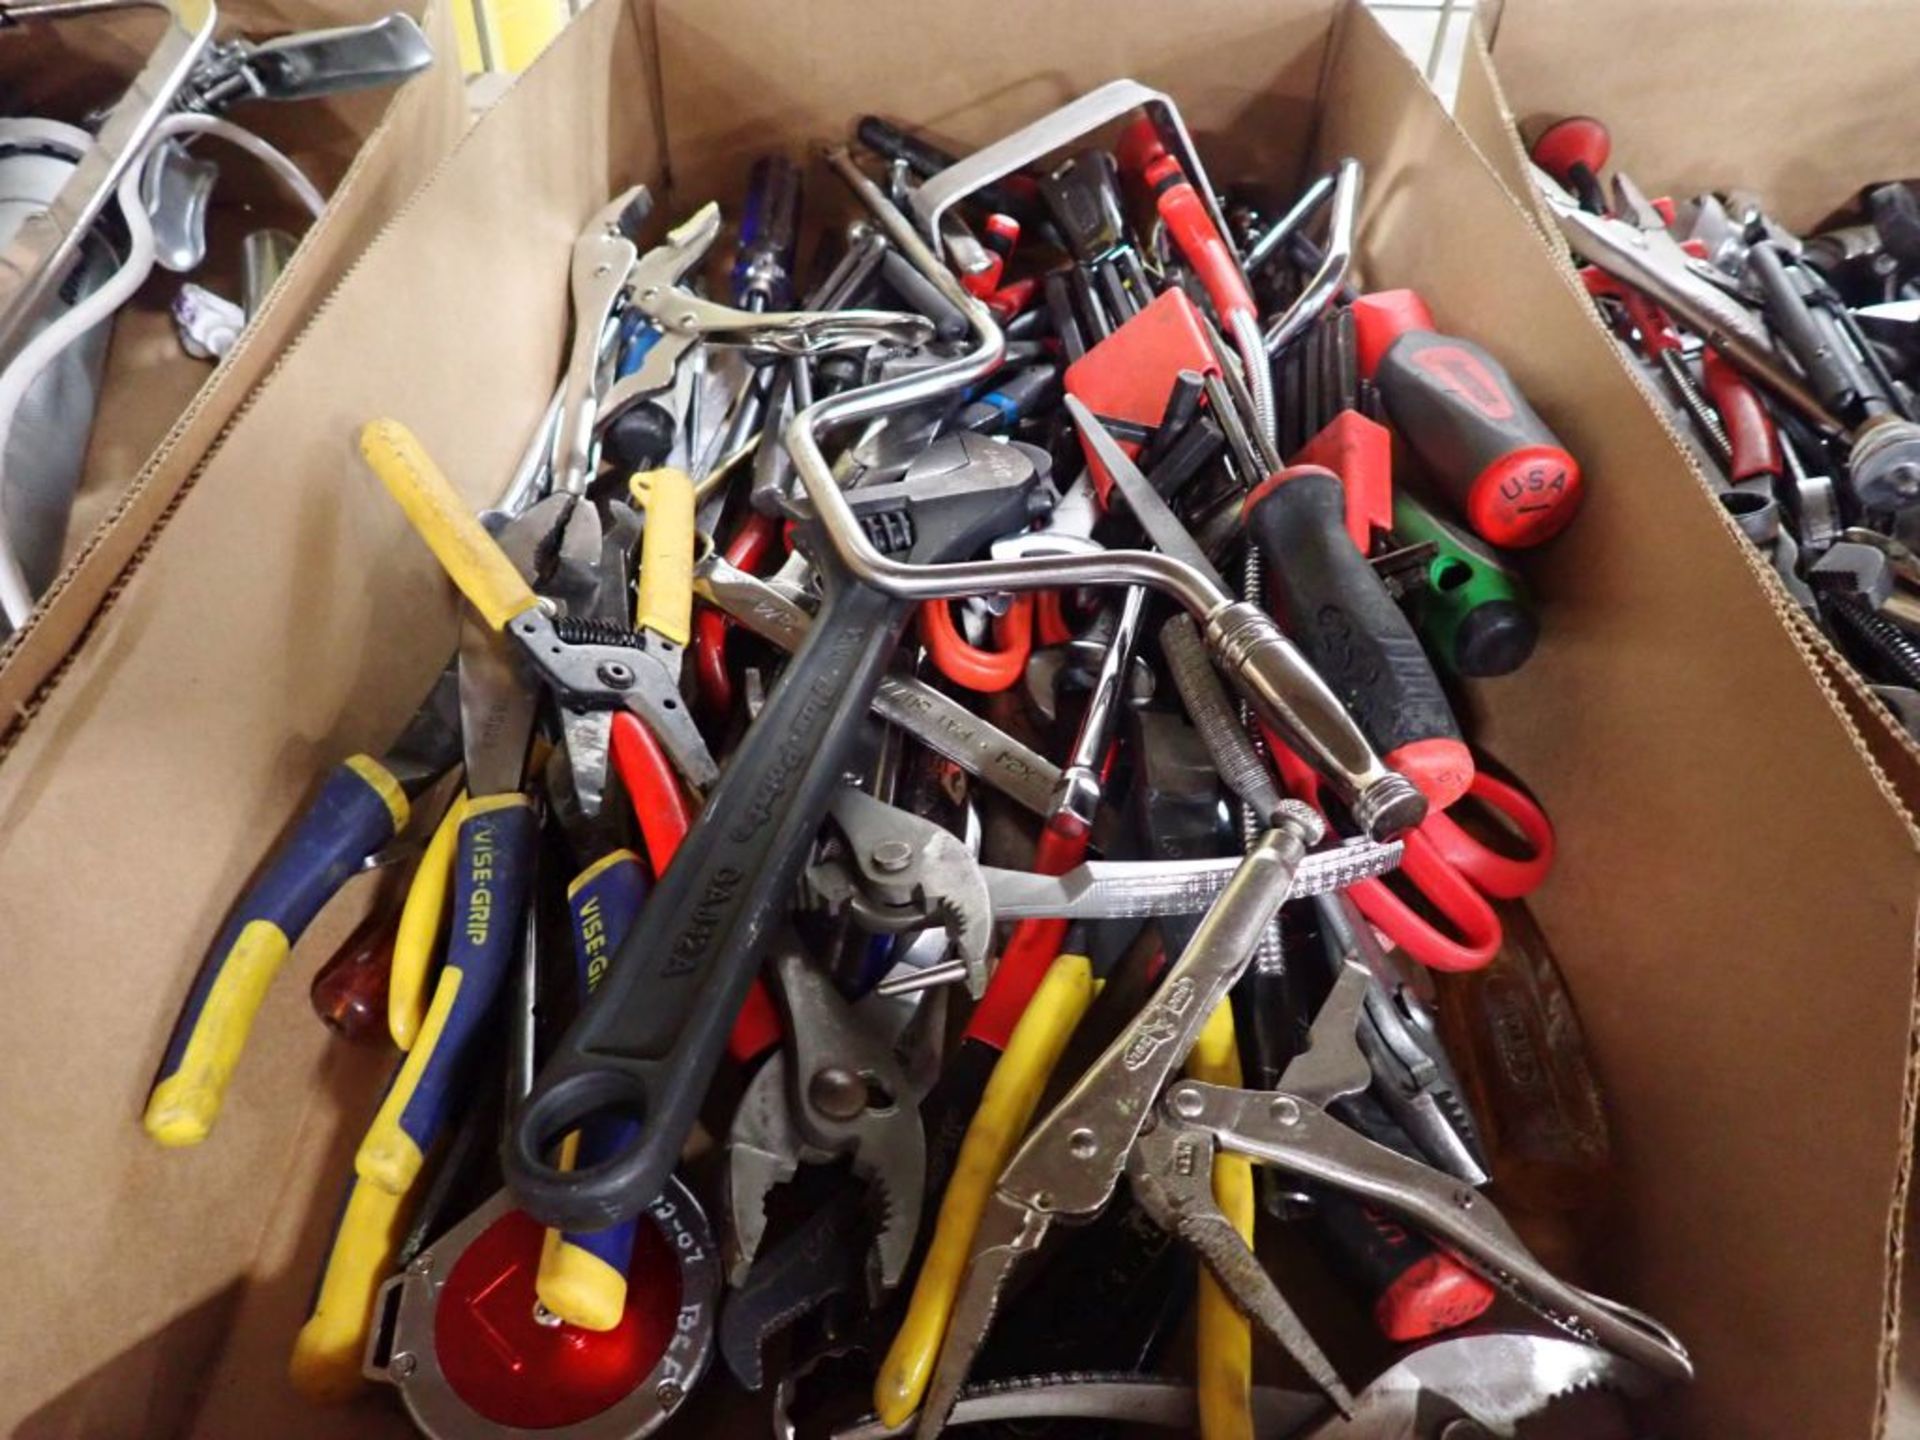 Lot of Assorted Tools | Tag: 241626 | Limited Forklift Assistance Available - $10.00 Lot Loading - Image 5 of 6